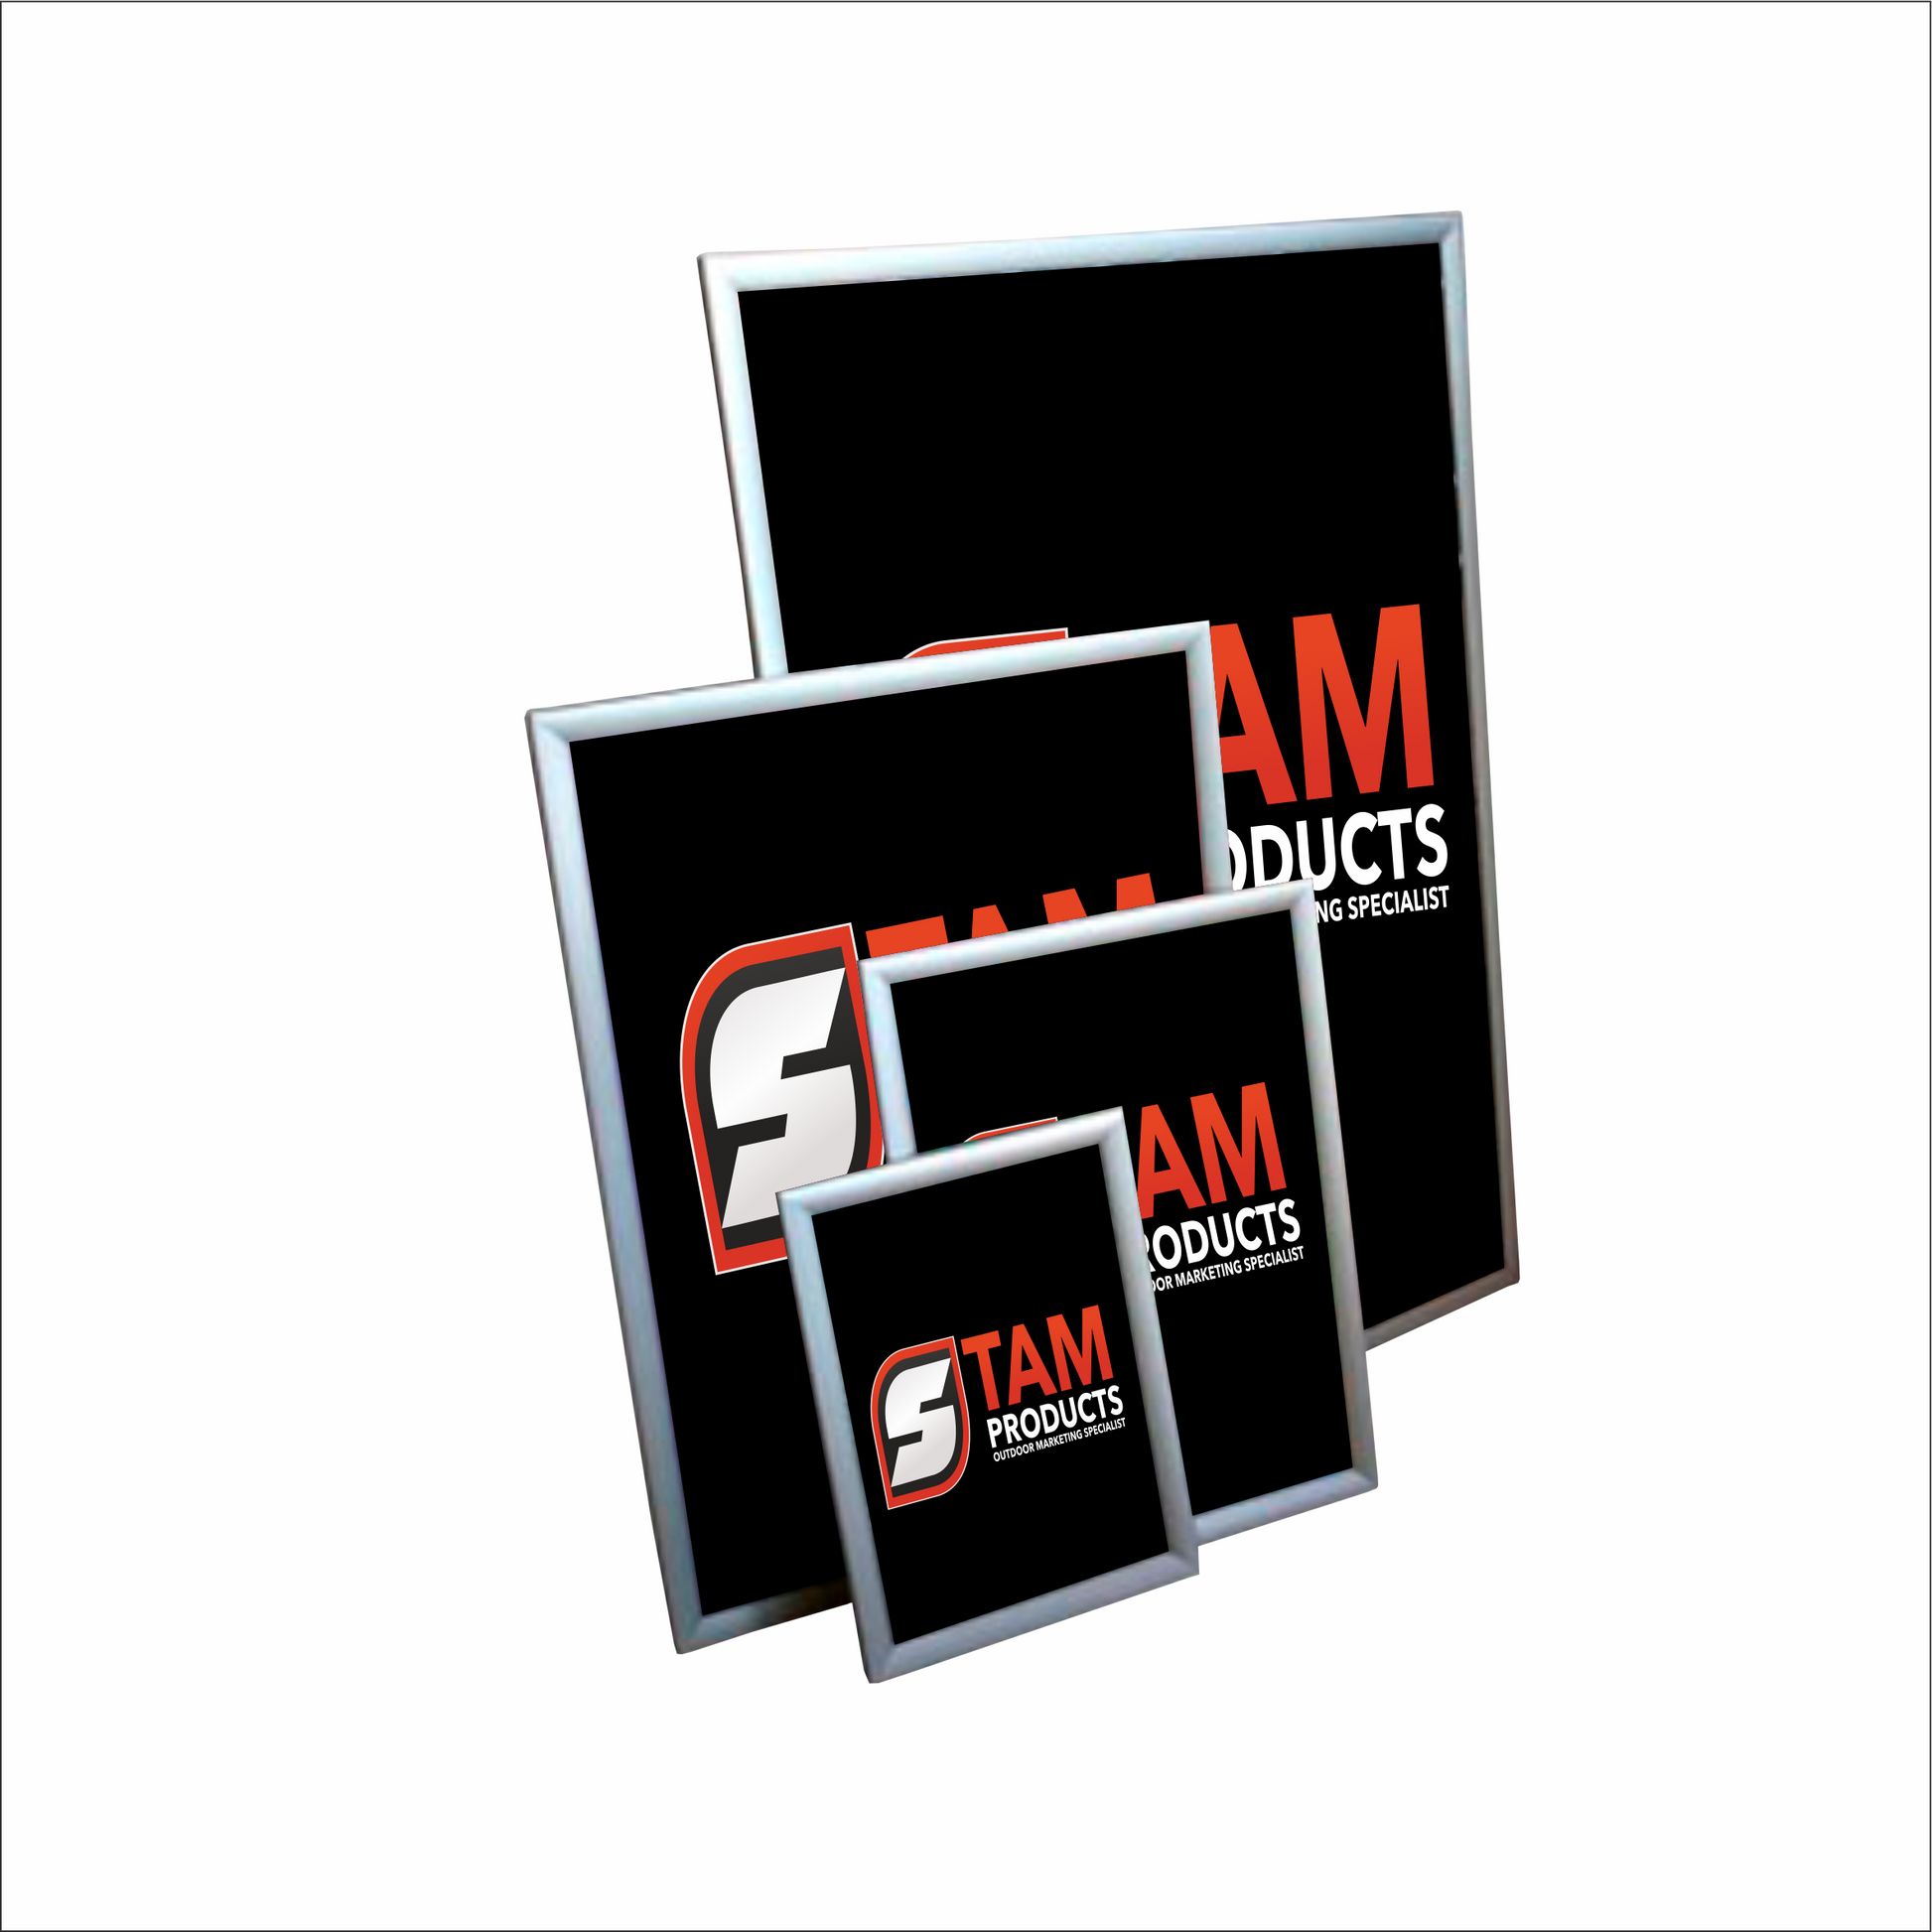 Branded clip frame banners